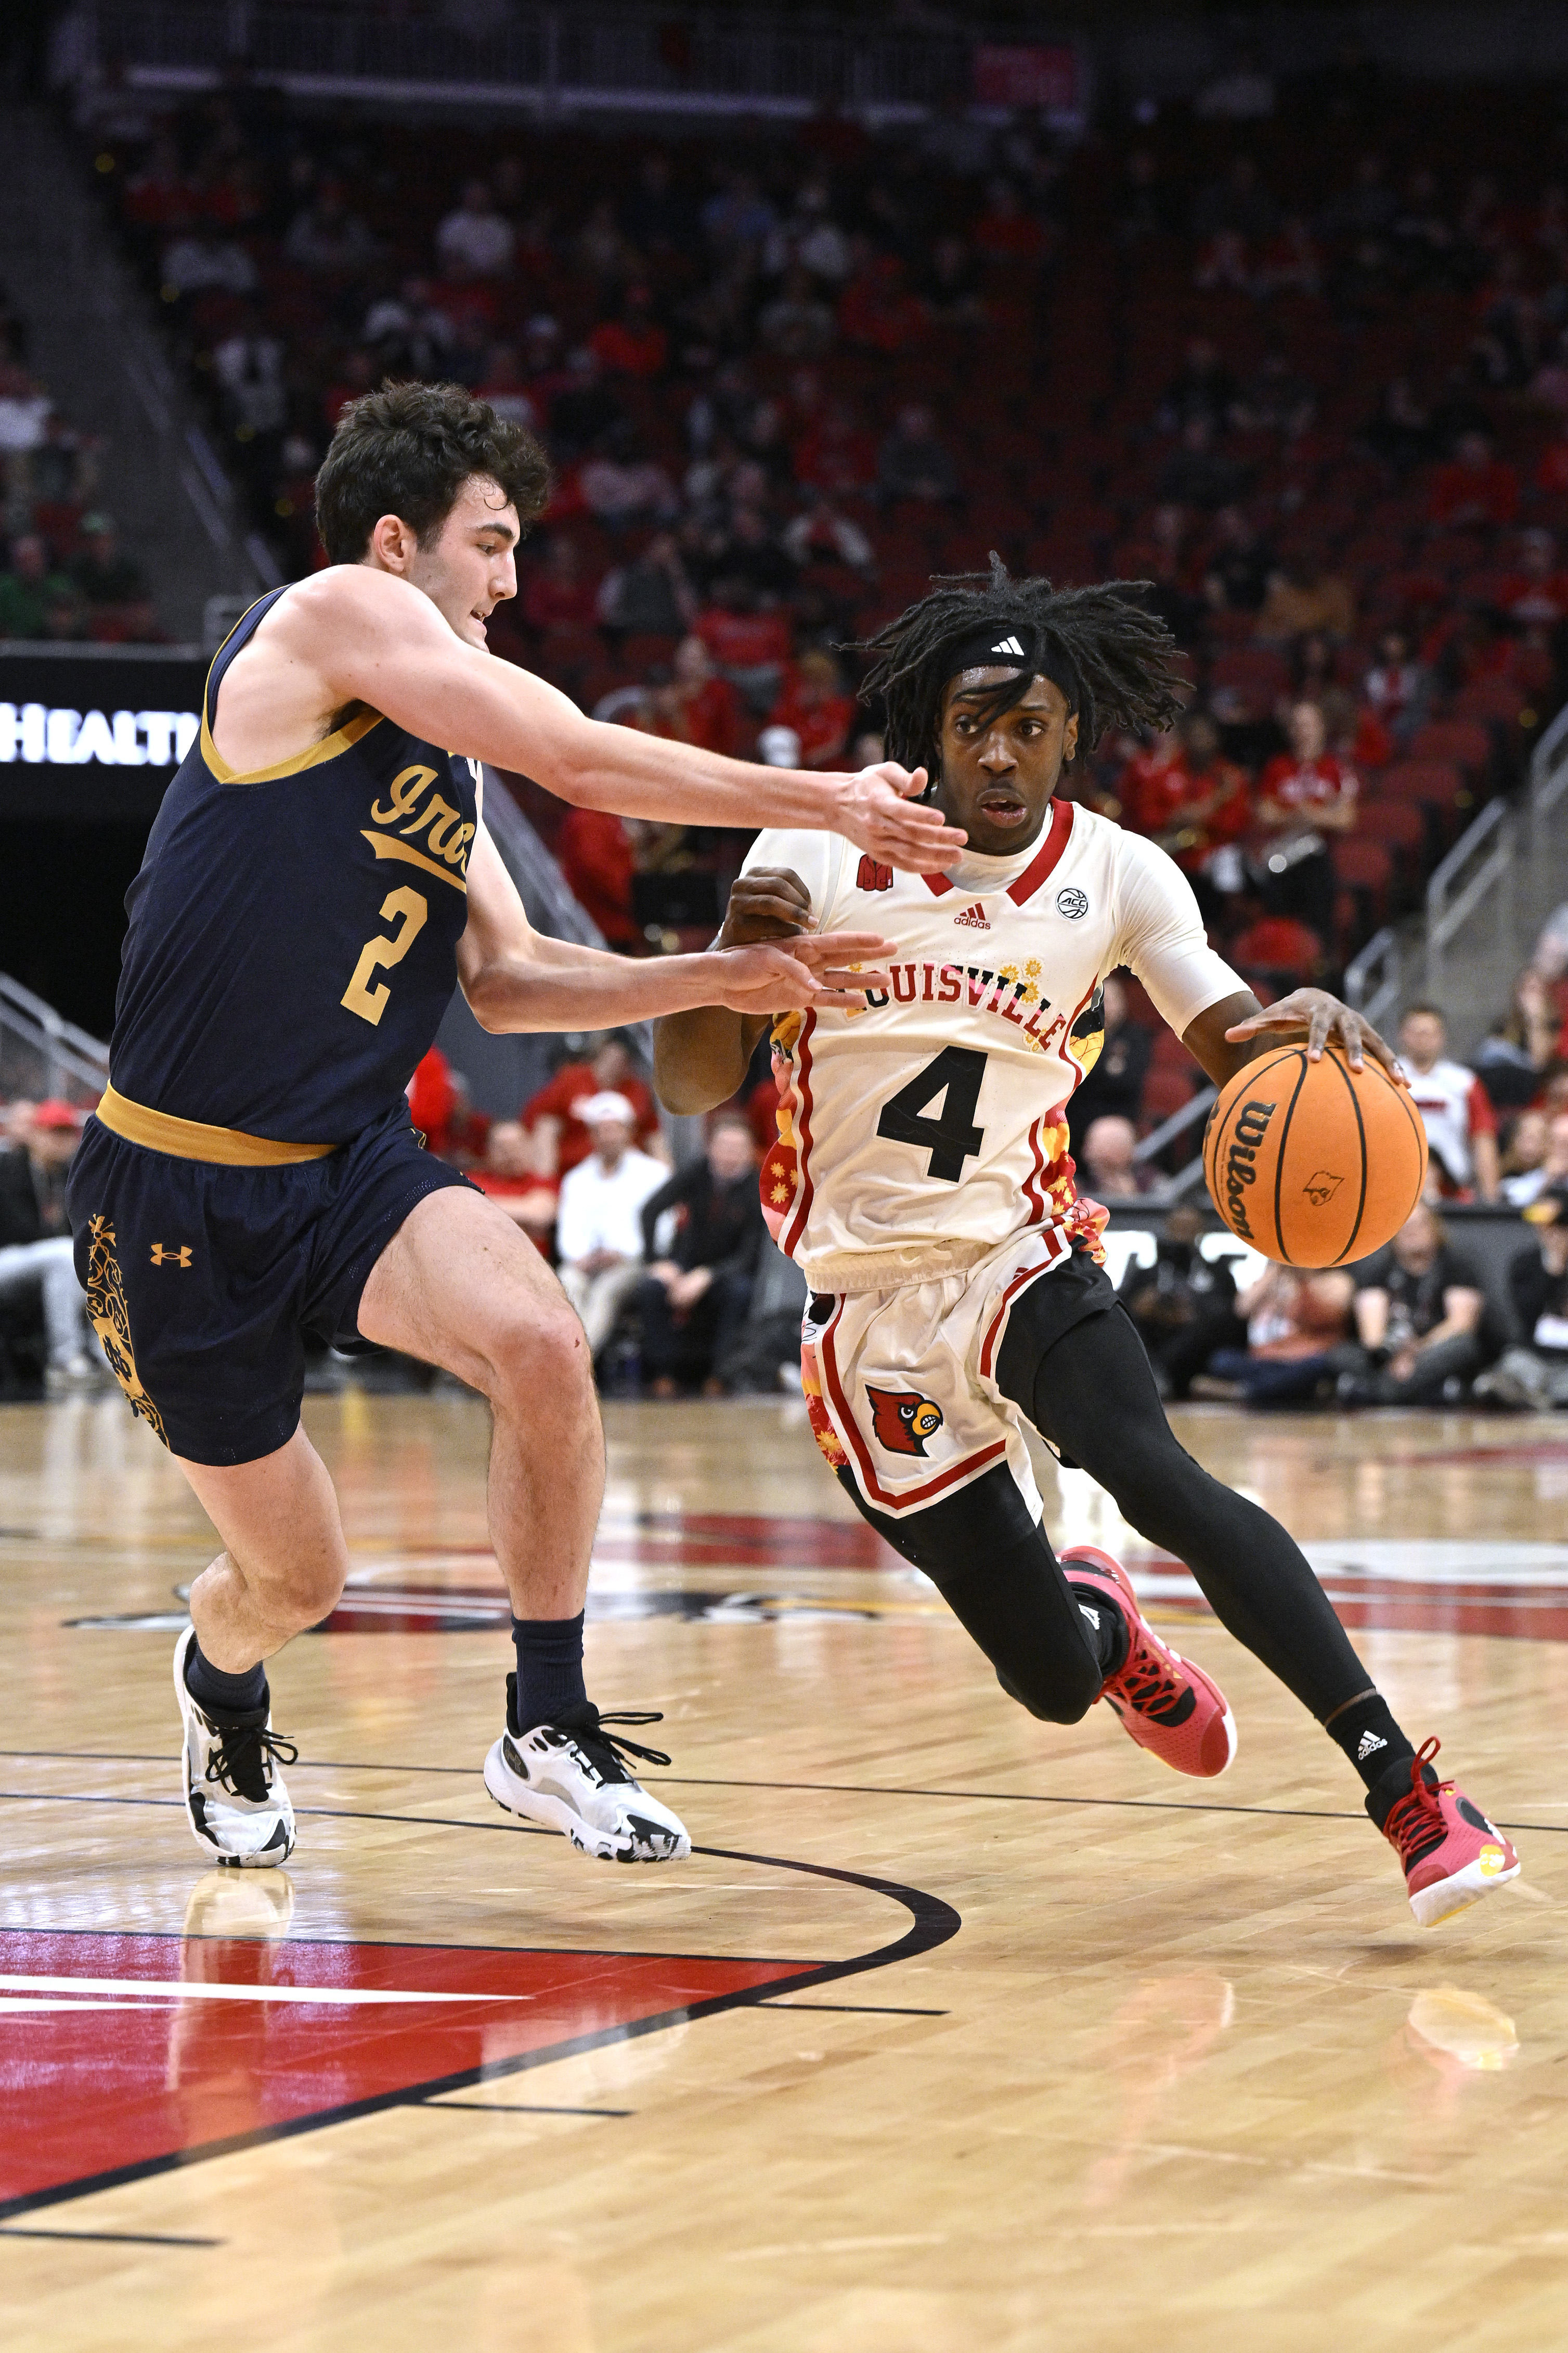 Notre Dame Fighting Irish pluck Louisville for 3rd straight win